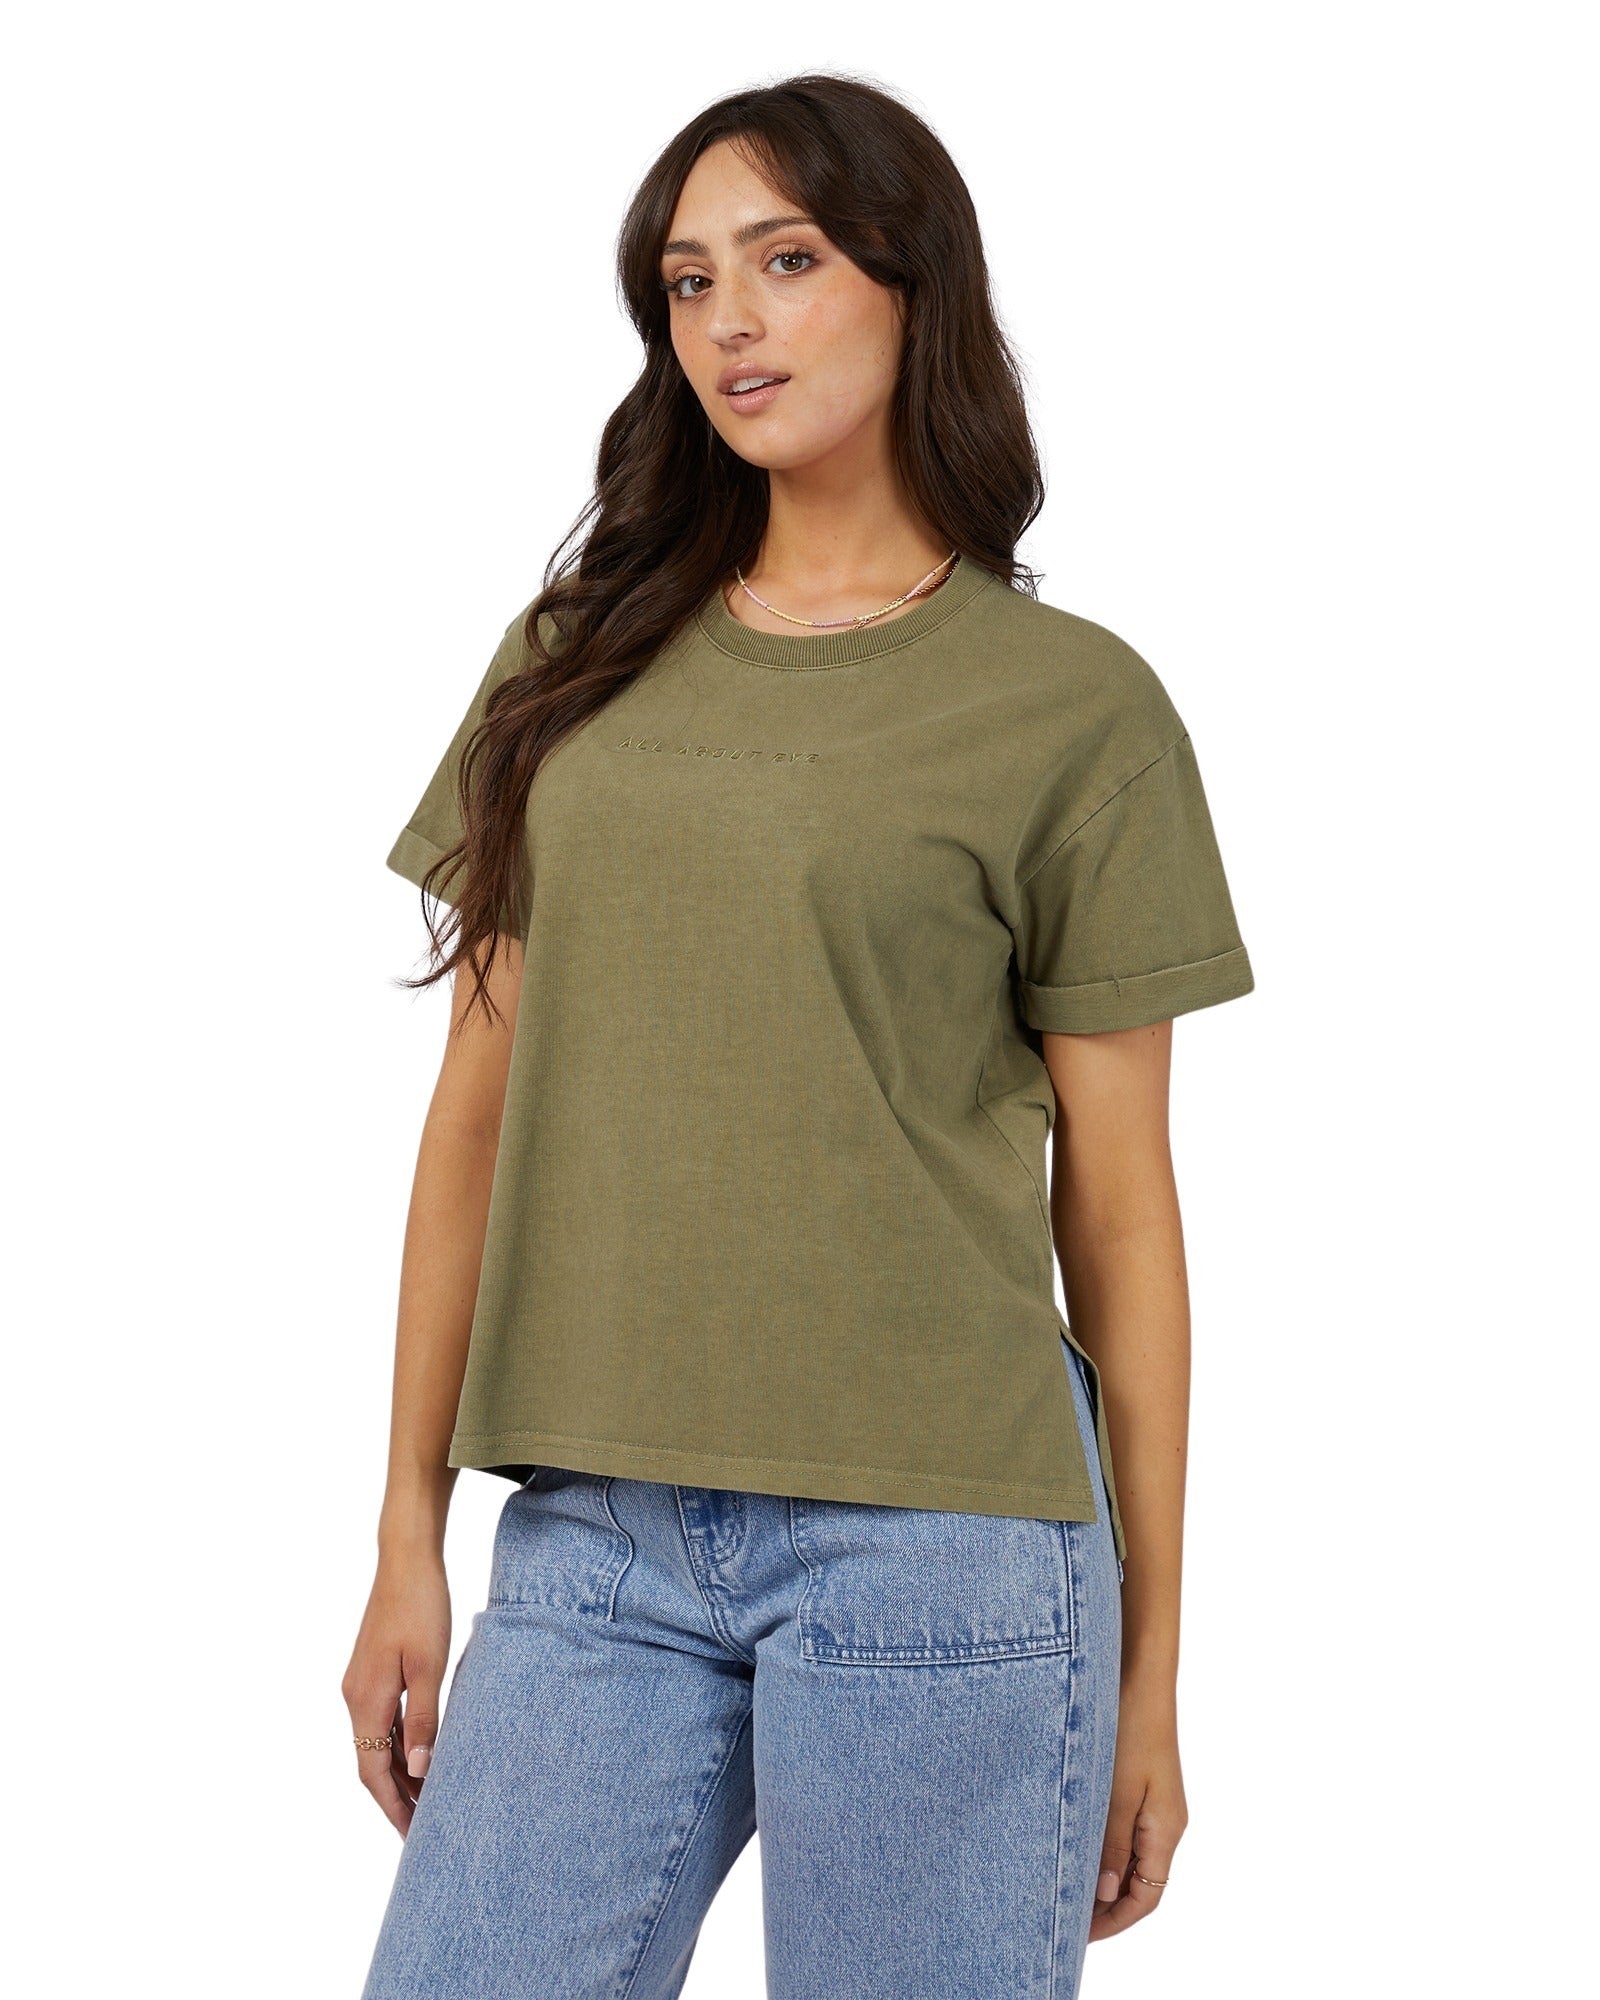 All About Eve - Washed Tee - Khaki